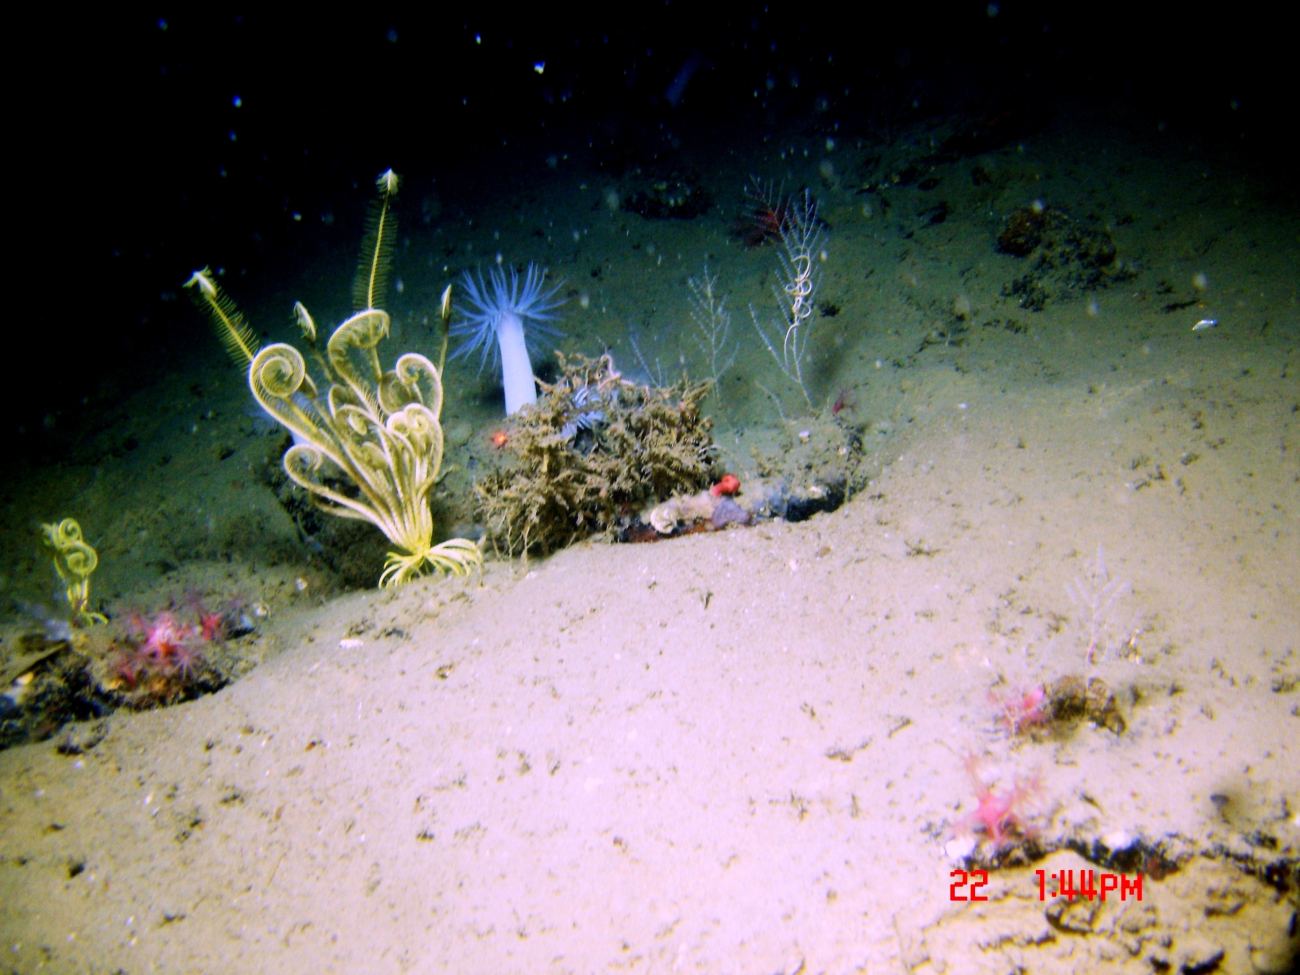 Small bamboo corals with associated brittle stars, a red anthomastus coral withpolyps retracted, a large white anemone, and a yellow feather star crinoid